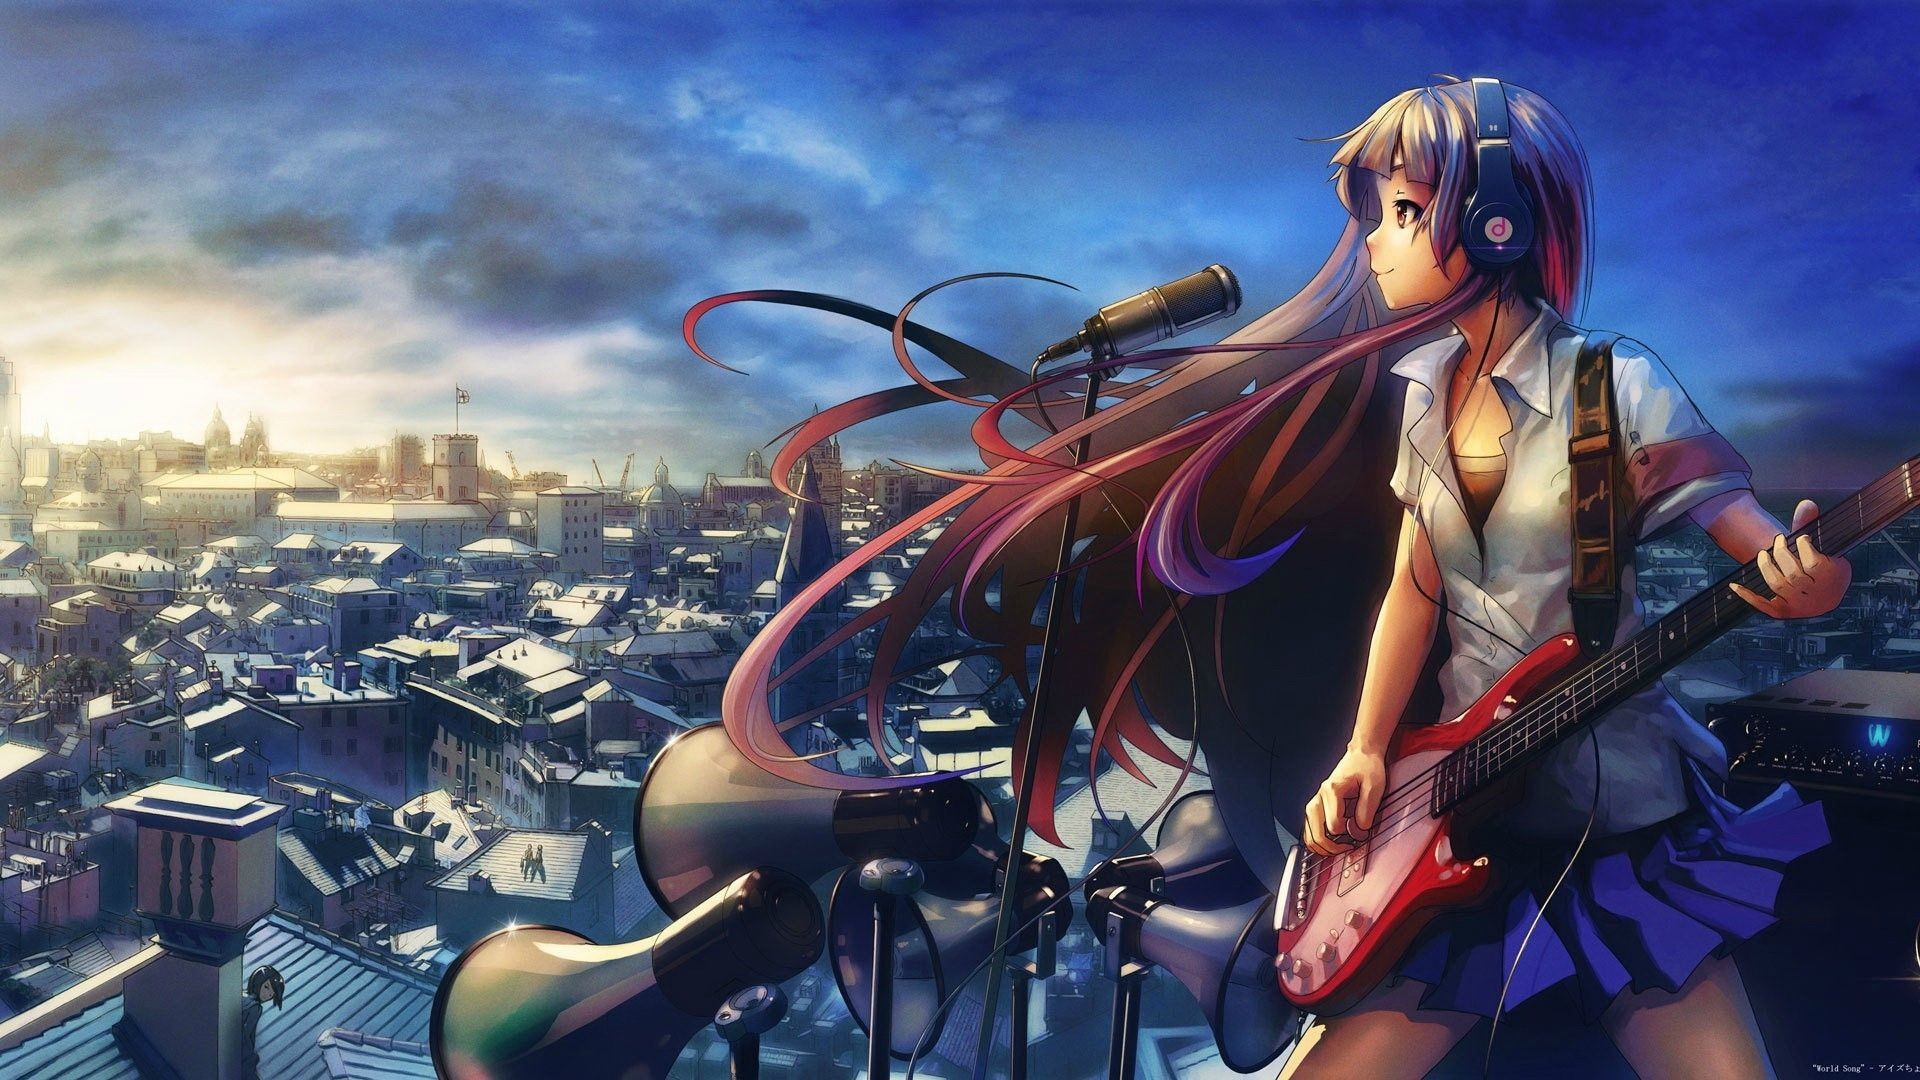 Anime girl singing on the roof wallpaper and image, picture, photo